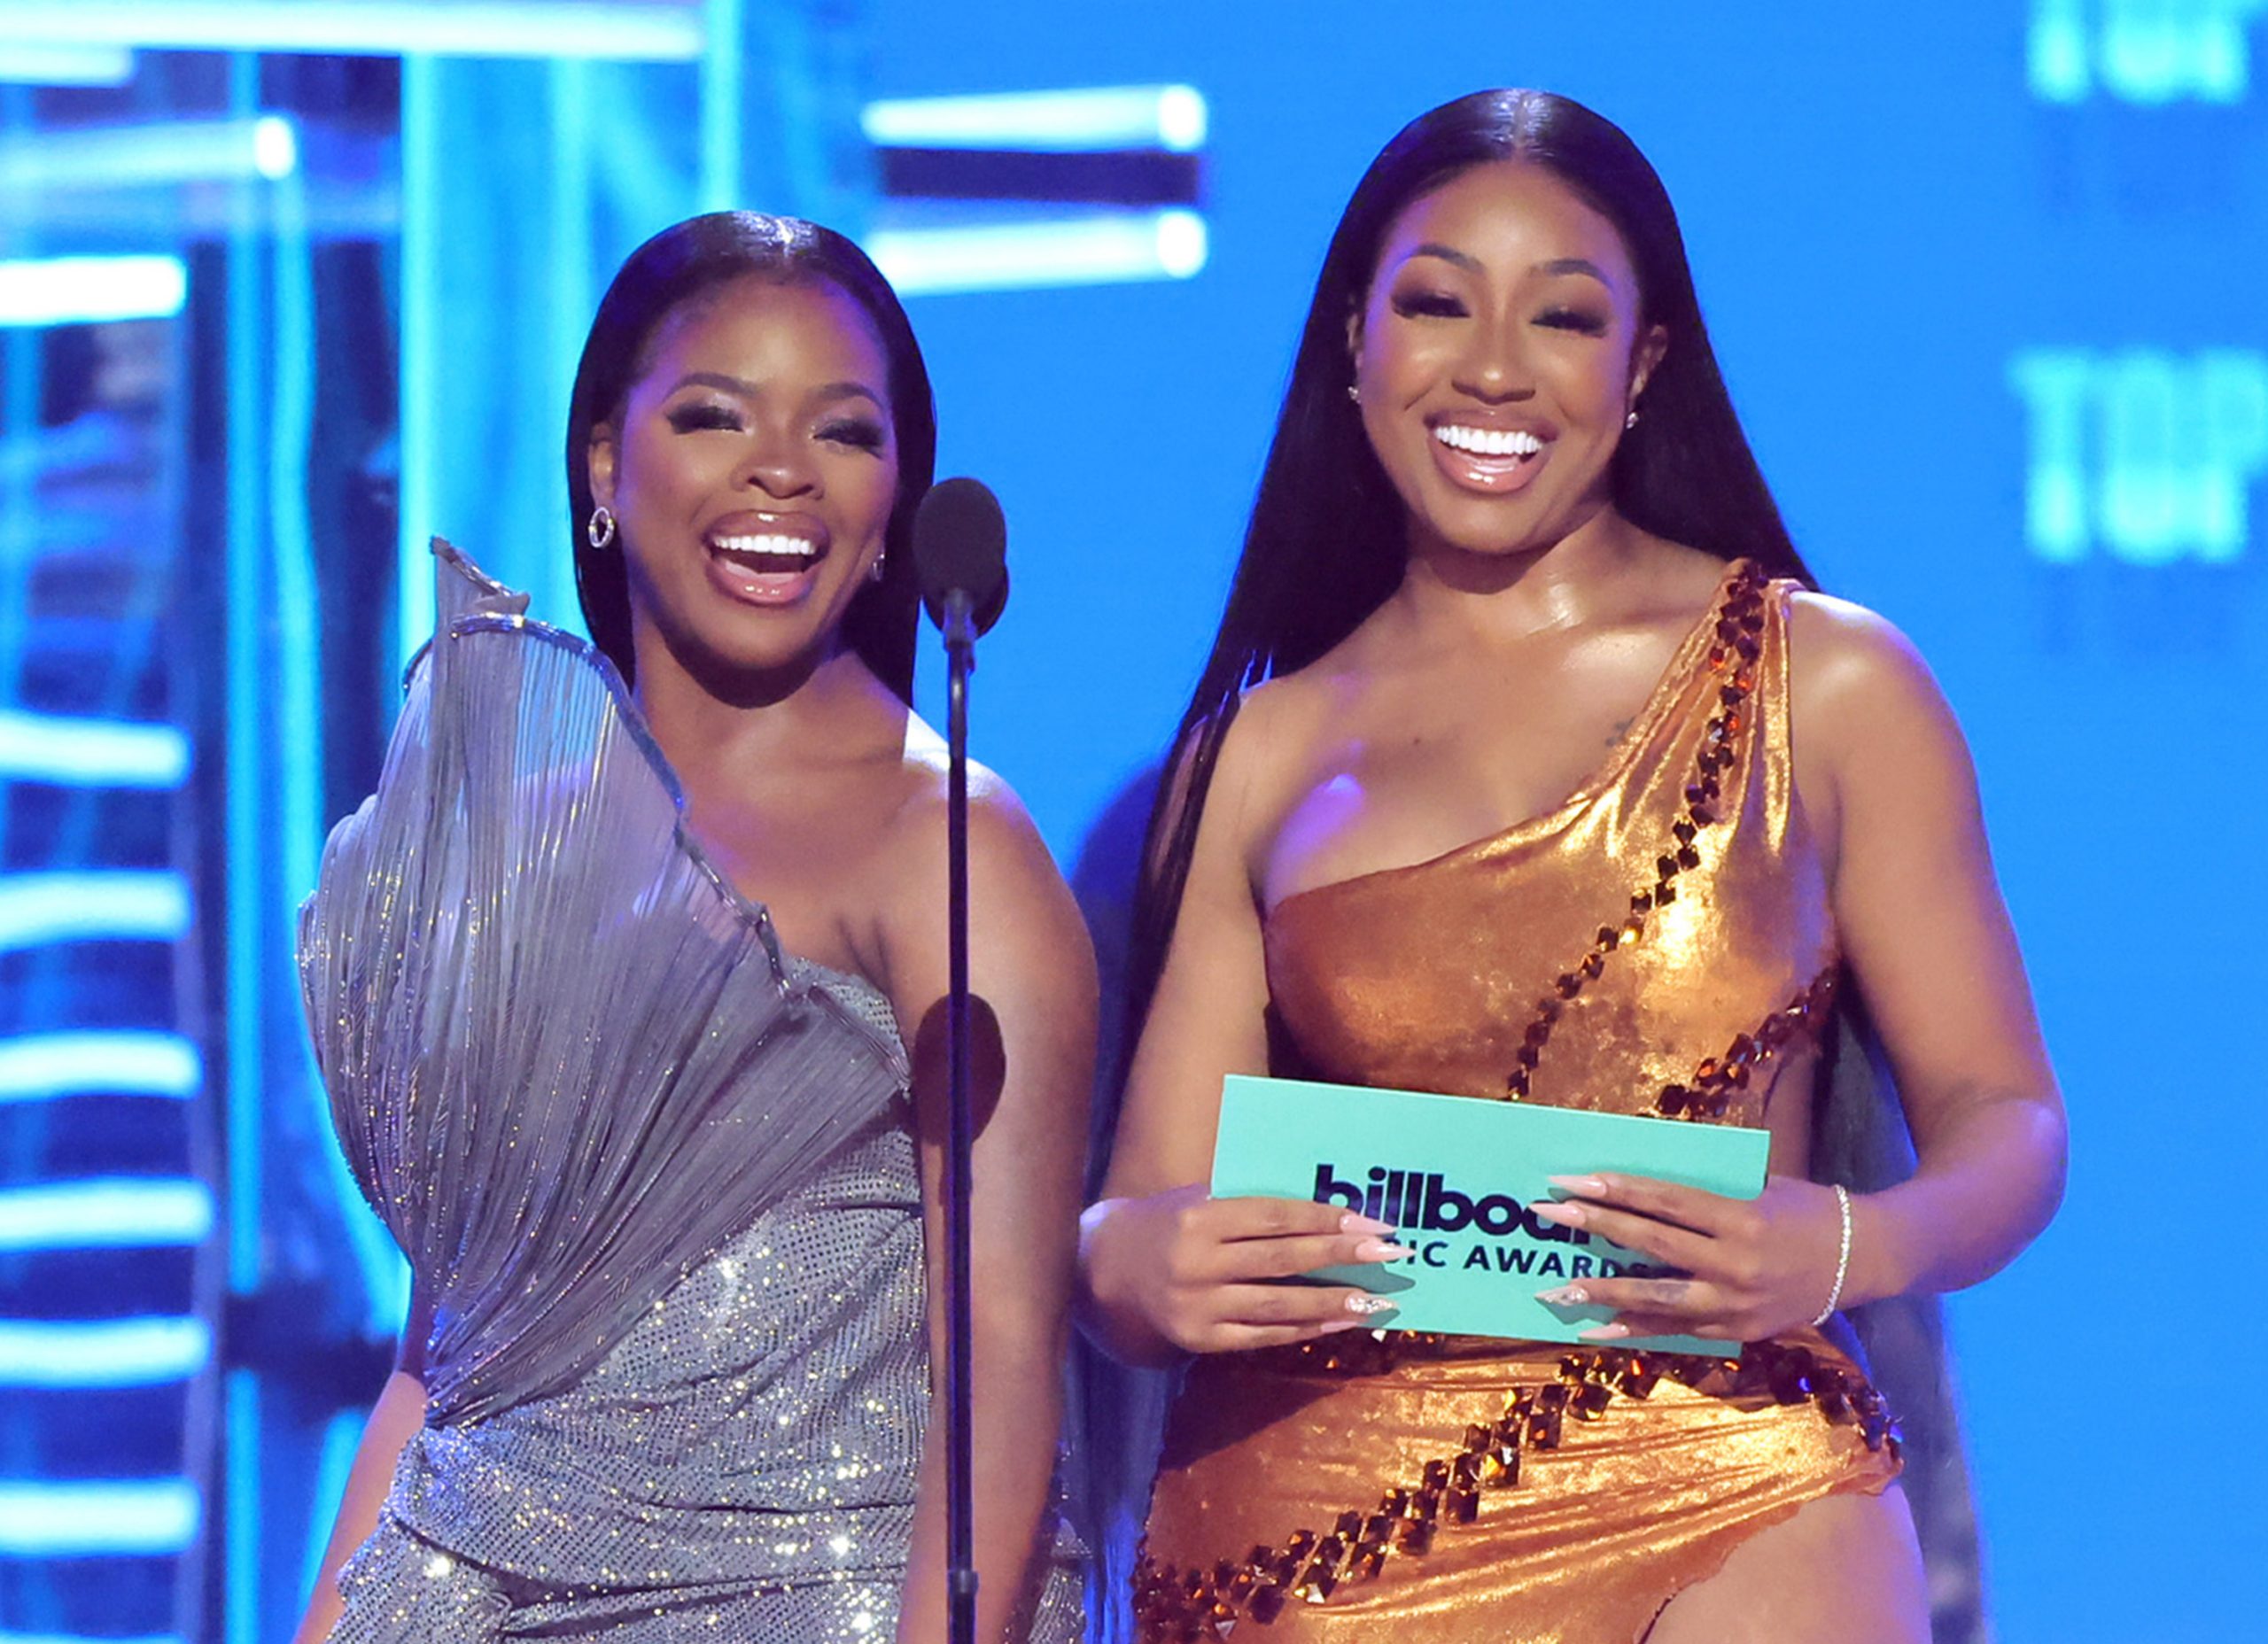 JT and Yung Miami of City Girls speak onstage during the 2022 Billboard Music Awards